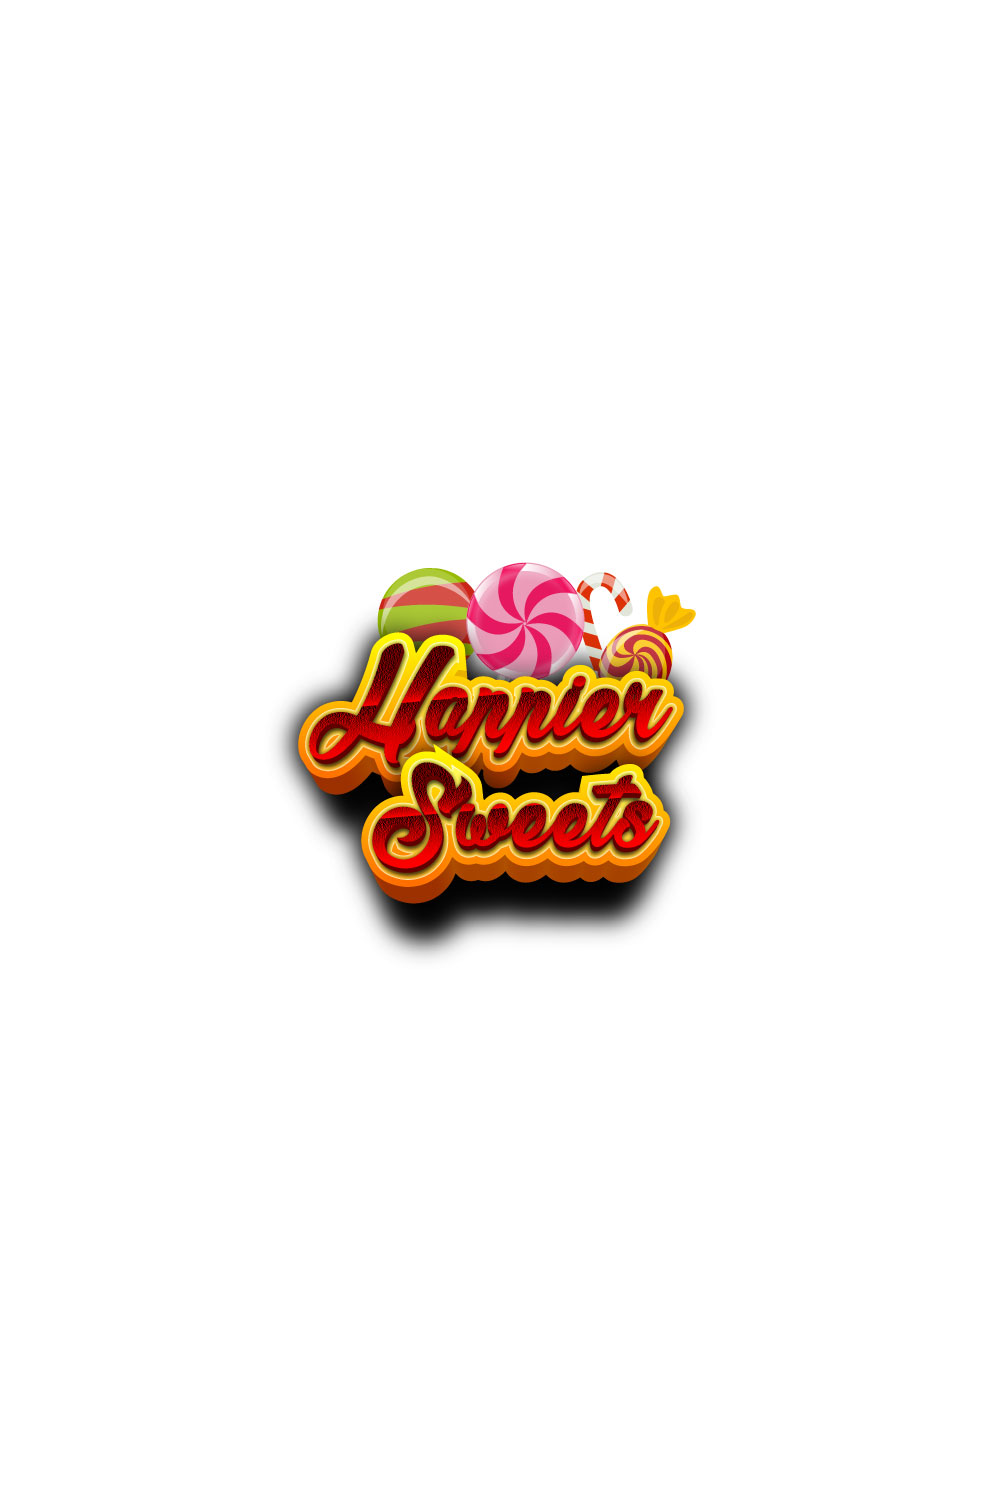 candy sweets logo 2 222